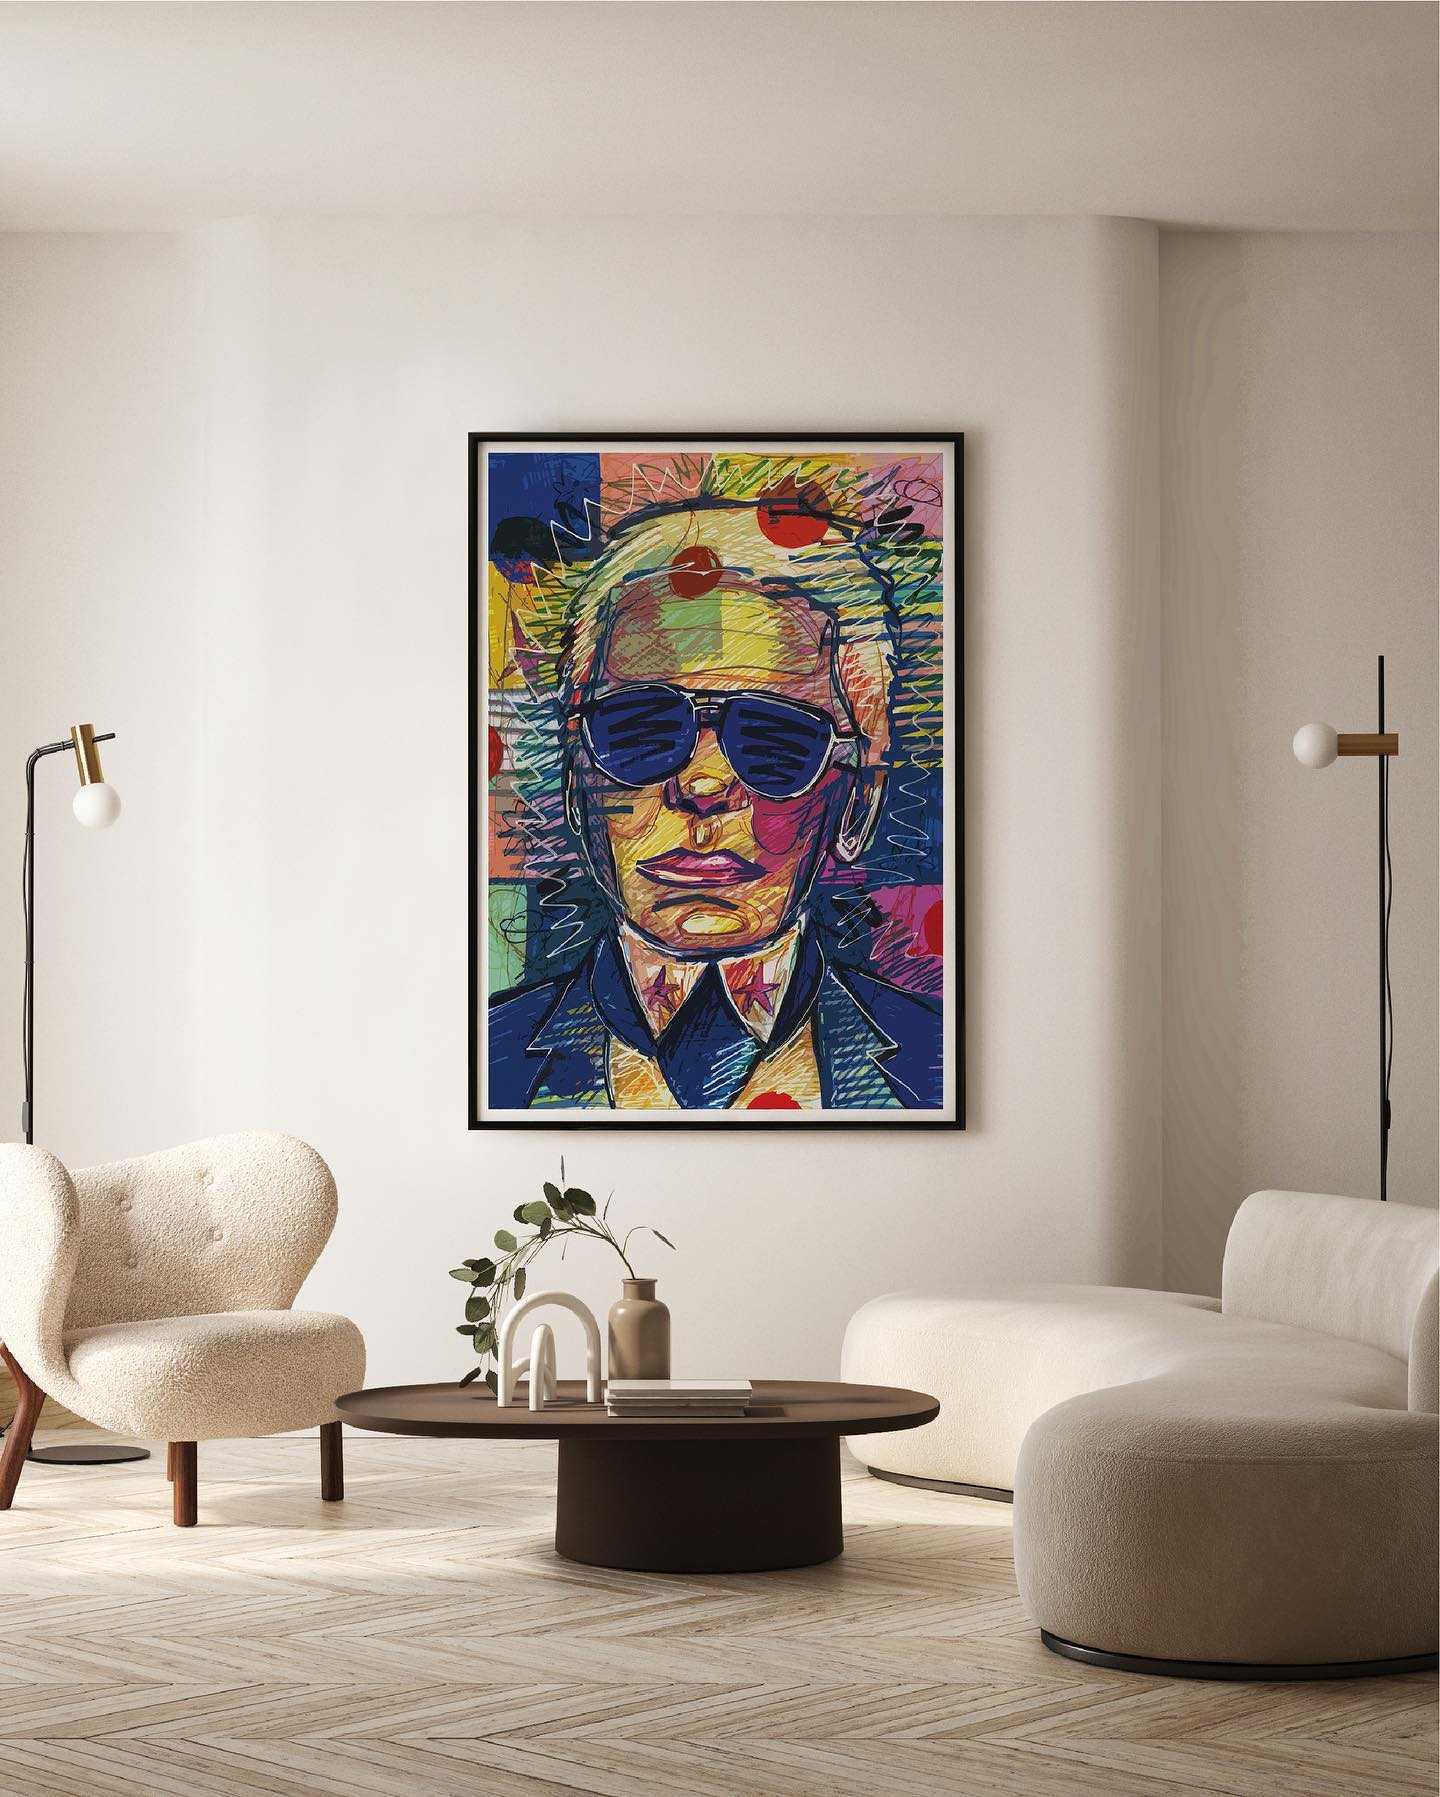 ‘Karl’ a limited edition art print from the ‘Sparks of Madness’ collection, capturing the essence of fashion legend Karl Lagerfeld.

#LimitedEditionArt #ArtPrints #ArtCollectors #KarlLagerfeld #Fashion #IconicArt #FashionArt #ArtforSale #CollectibleArt #ArtEnthusiast #FashionInspiration #expressiveart